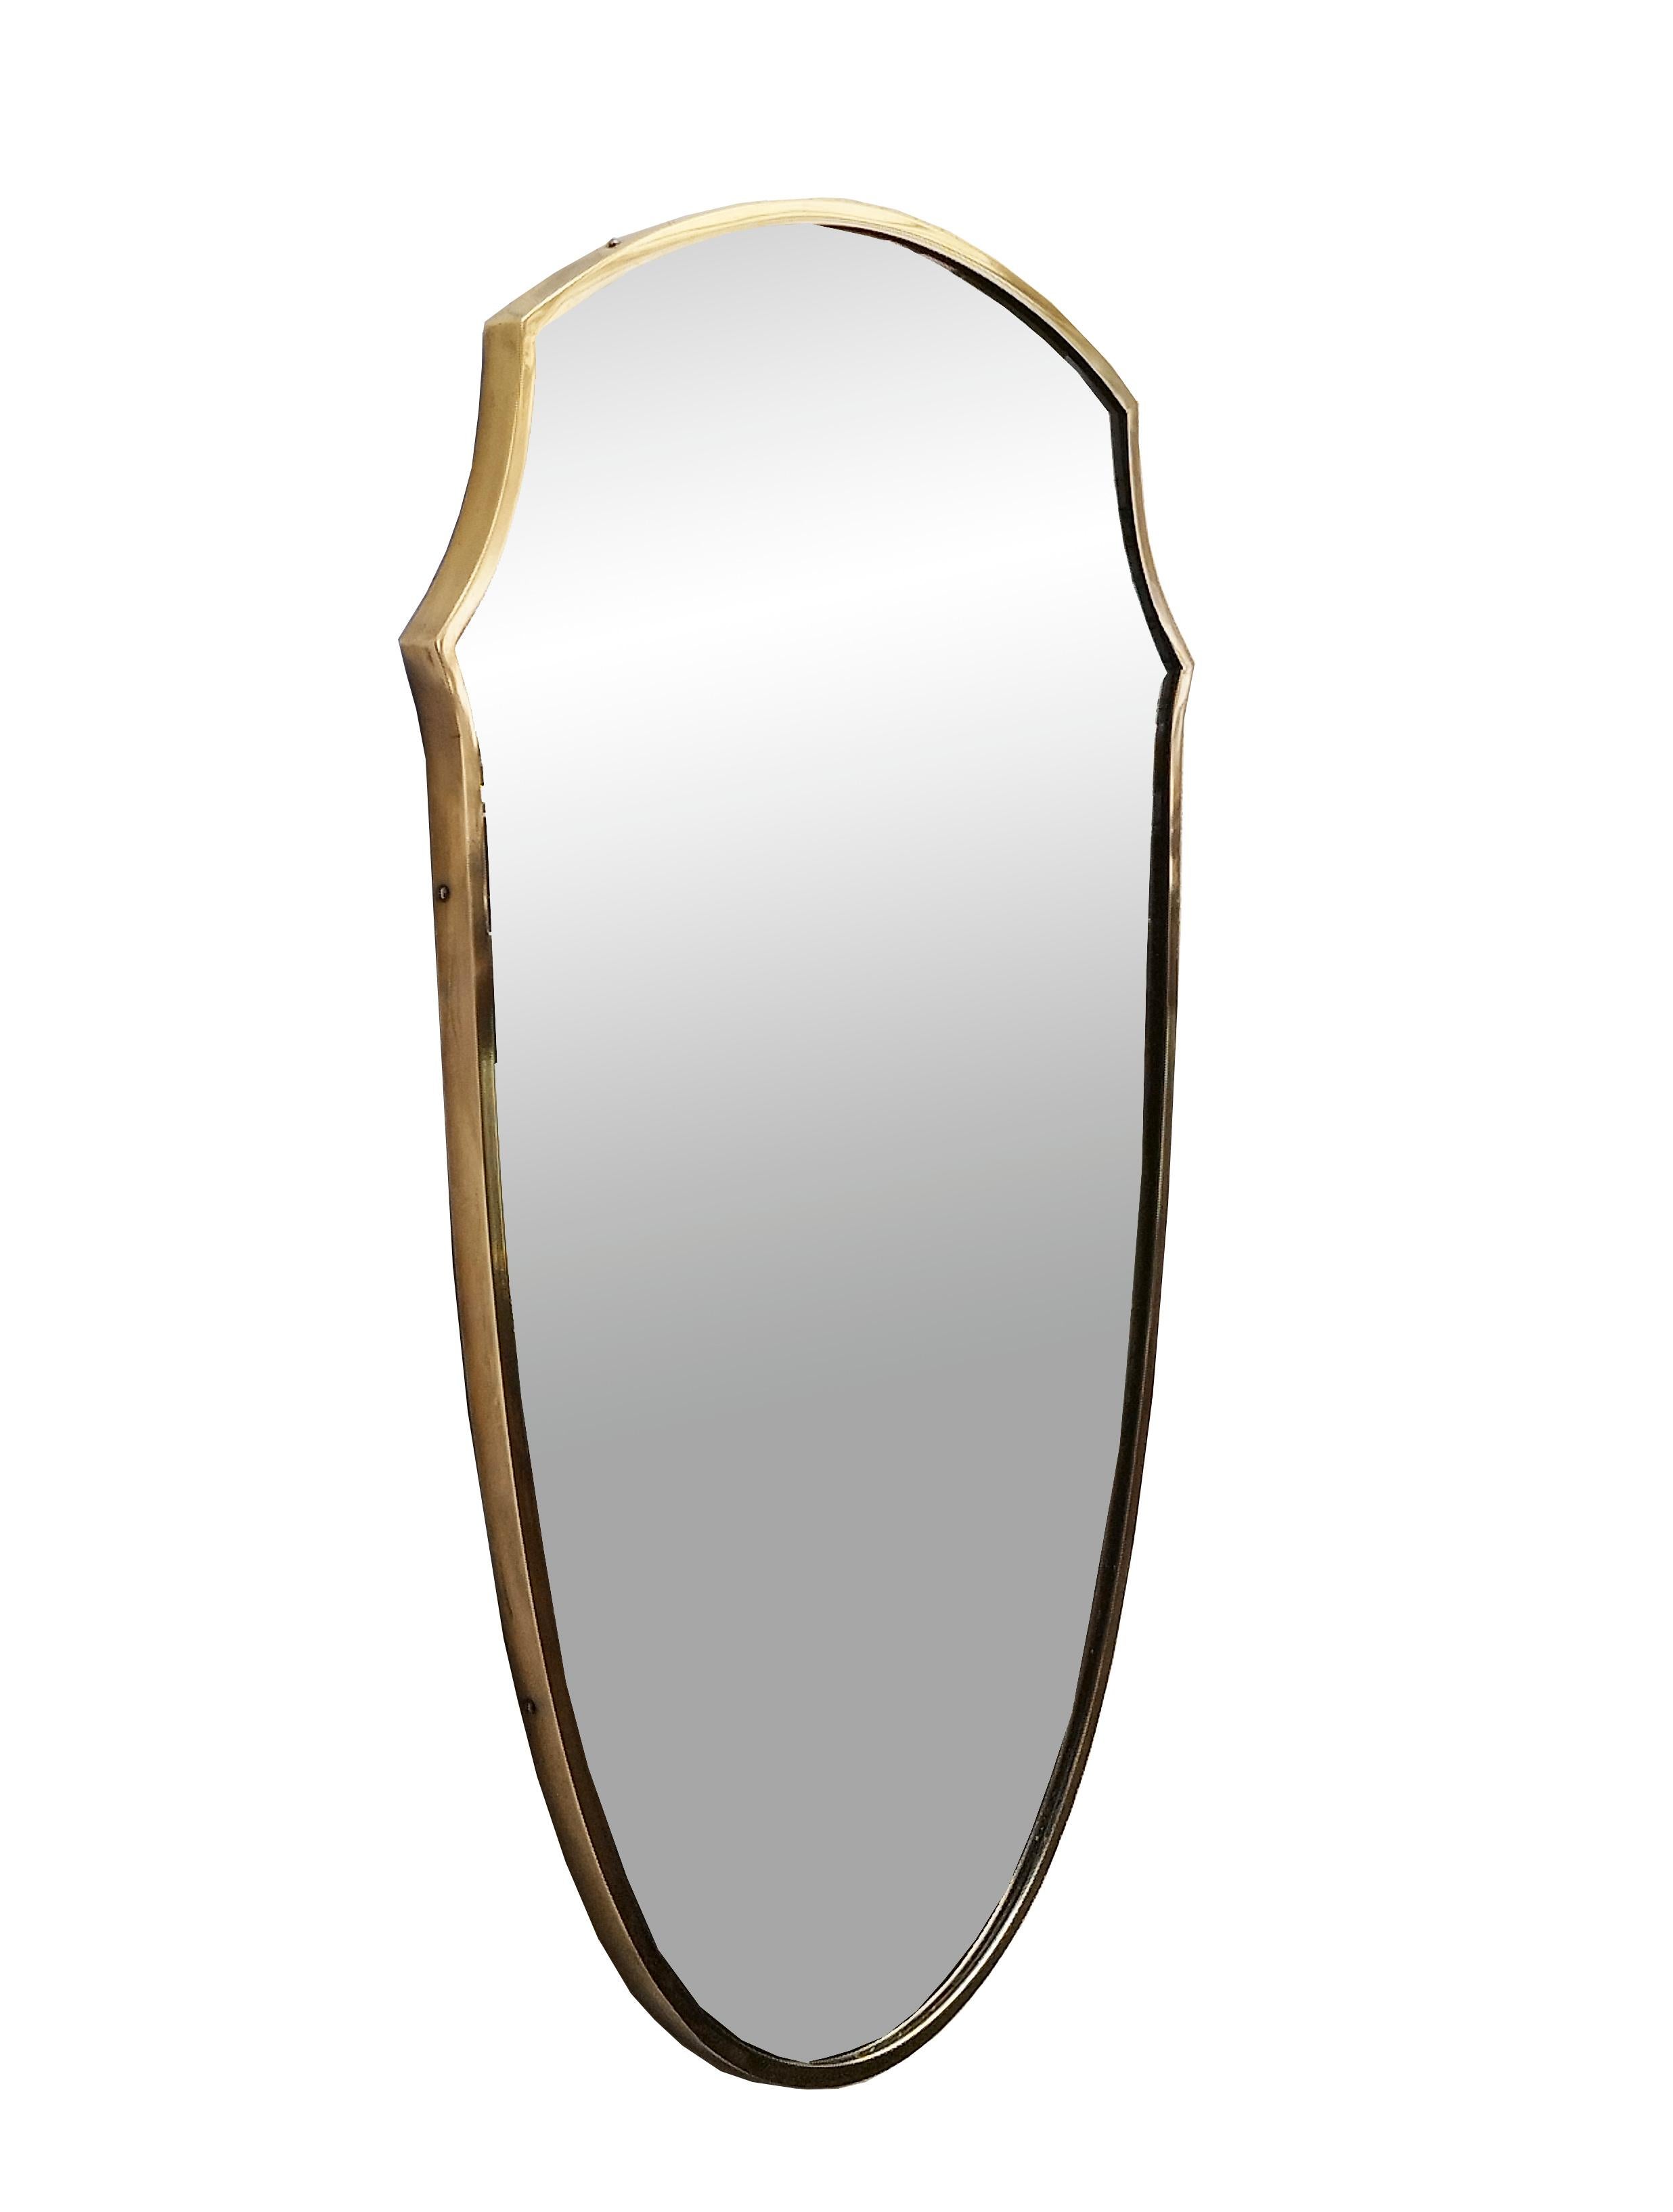 Solid brass shield wall mirror designed and manufactured in Italy in the 1950s, the brass is in original patina, the original mirror glass is in perfect condition.